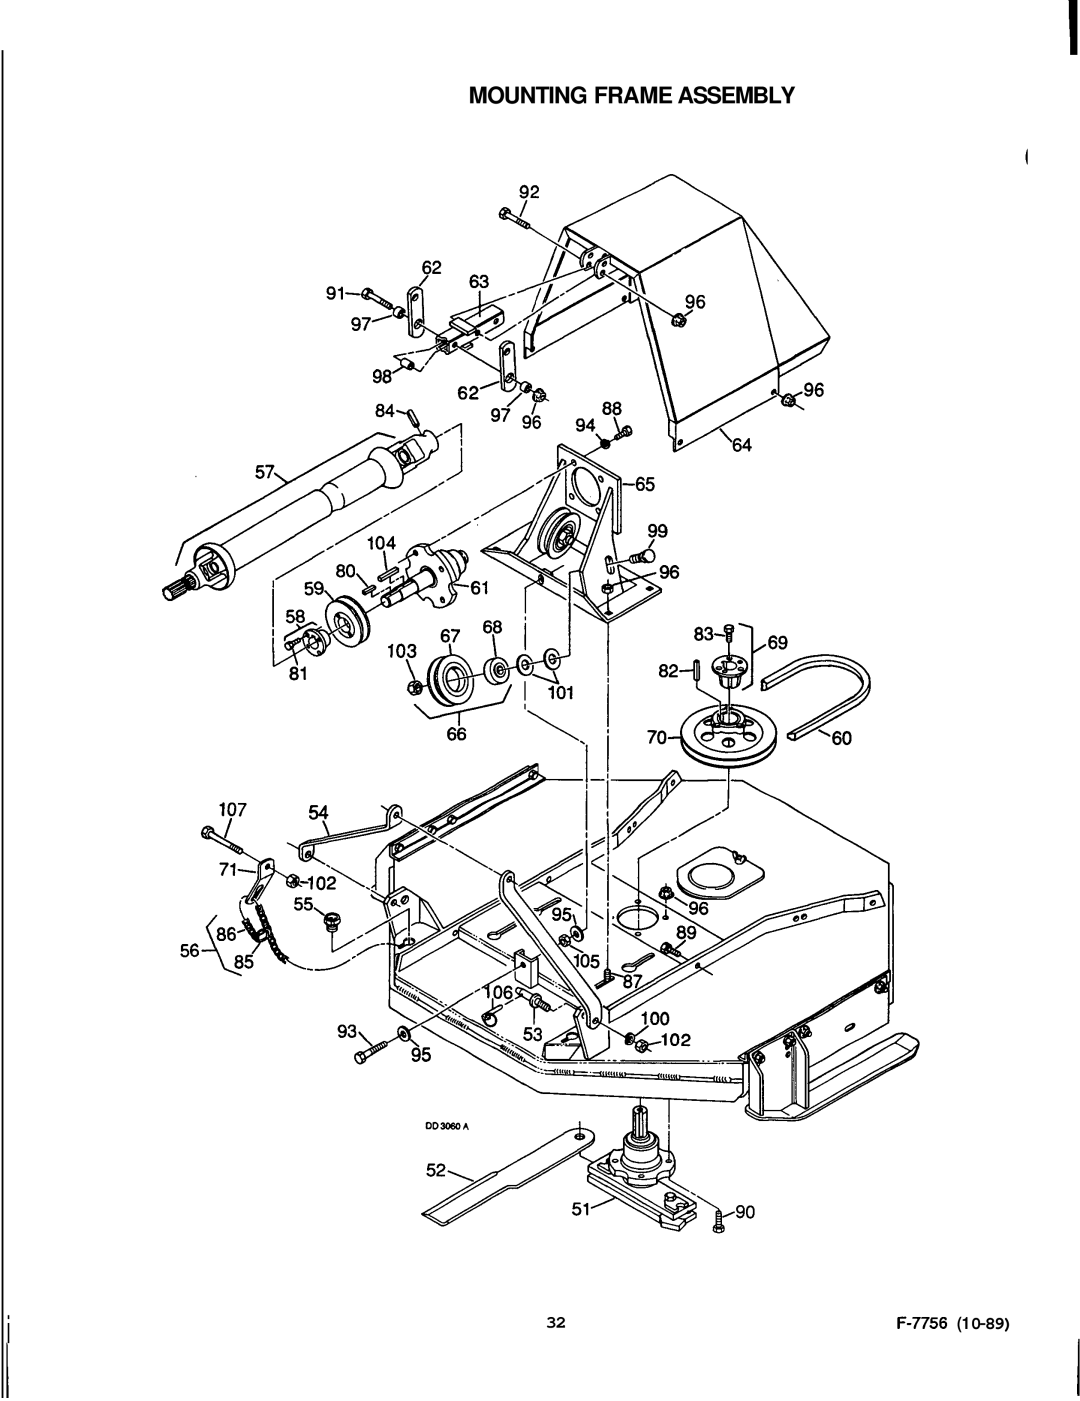 Honda Power Equipment RM752A manual Mounting Frame Assembly, F-7756 